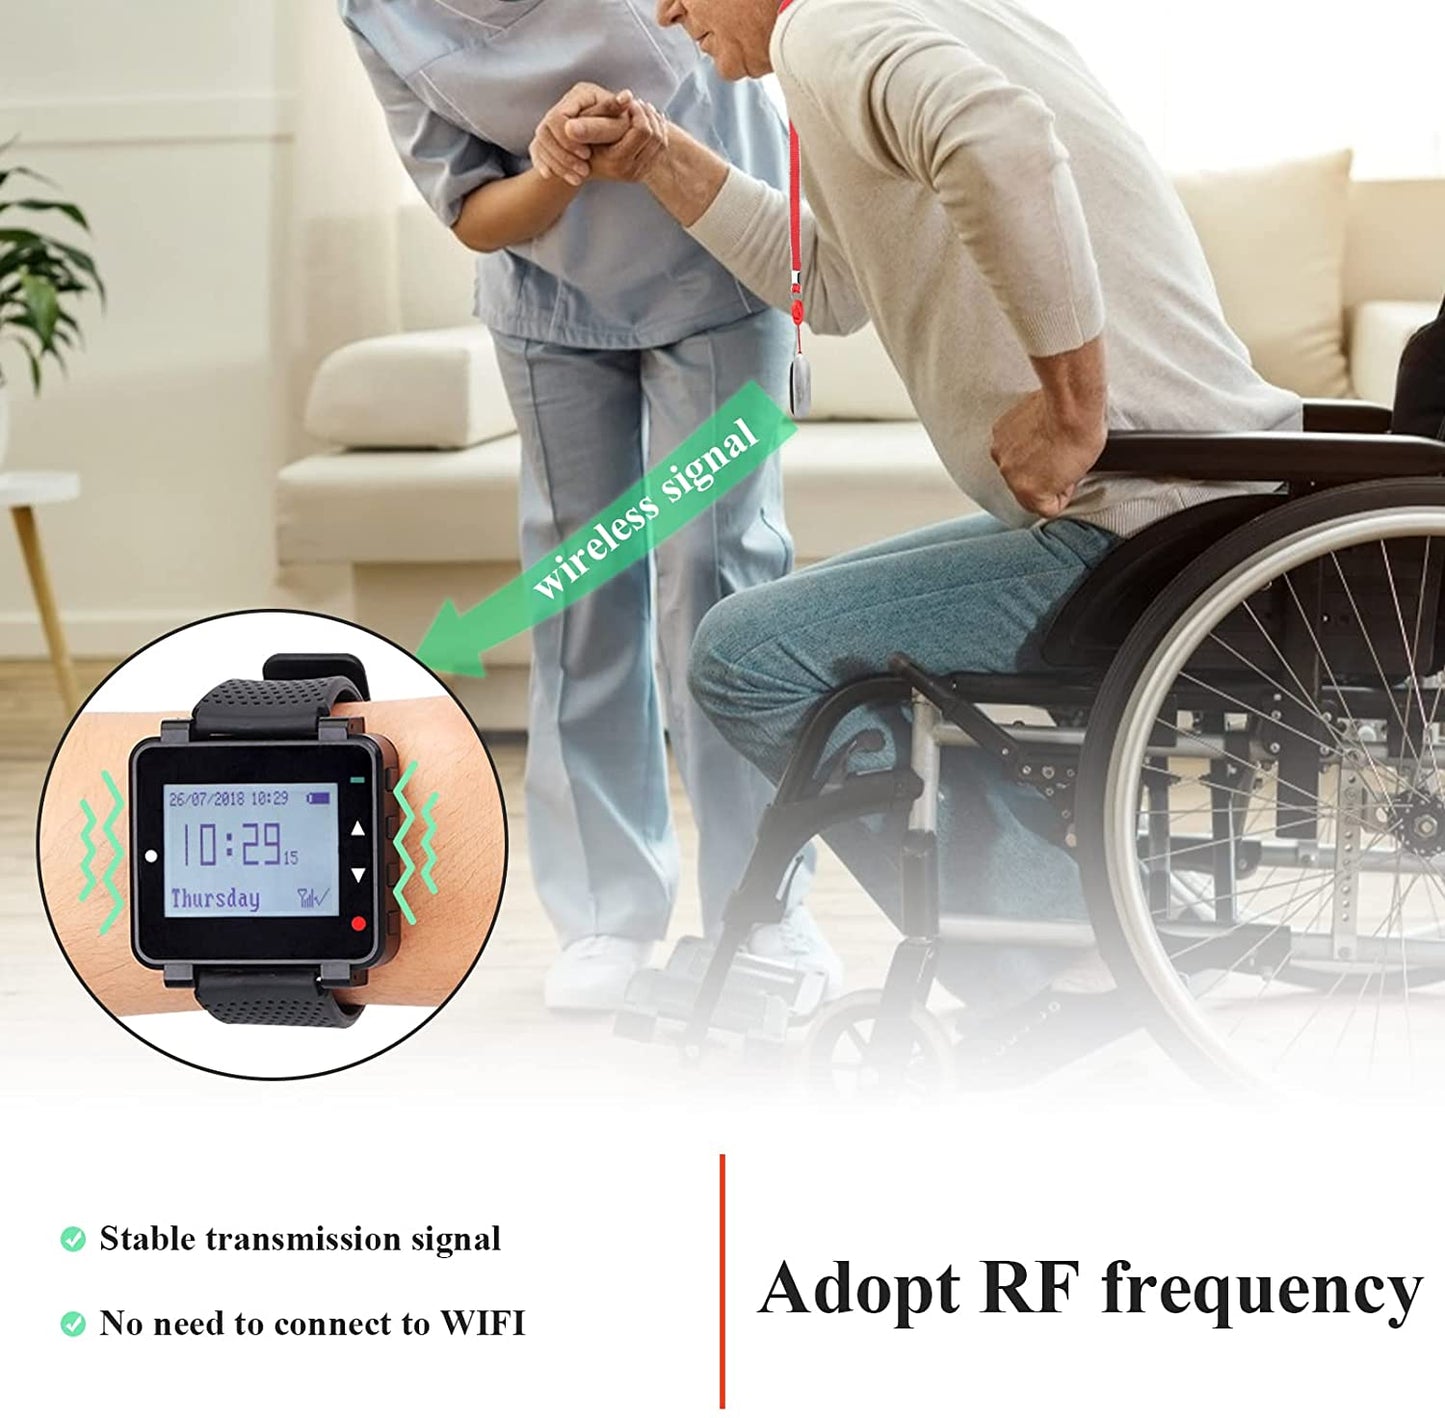 Retekess T128-TD019 Wireless Caregiver Pager Alert System Emergency Call Button with 600mAh Built-in Battery